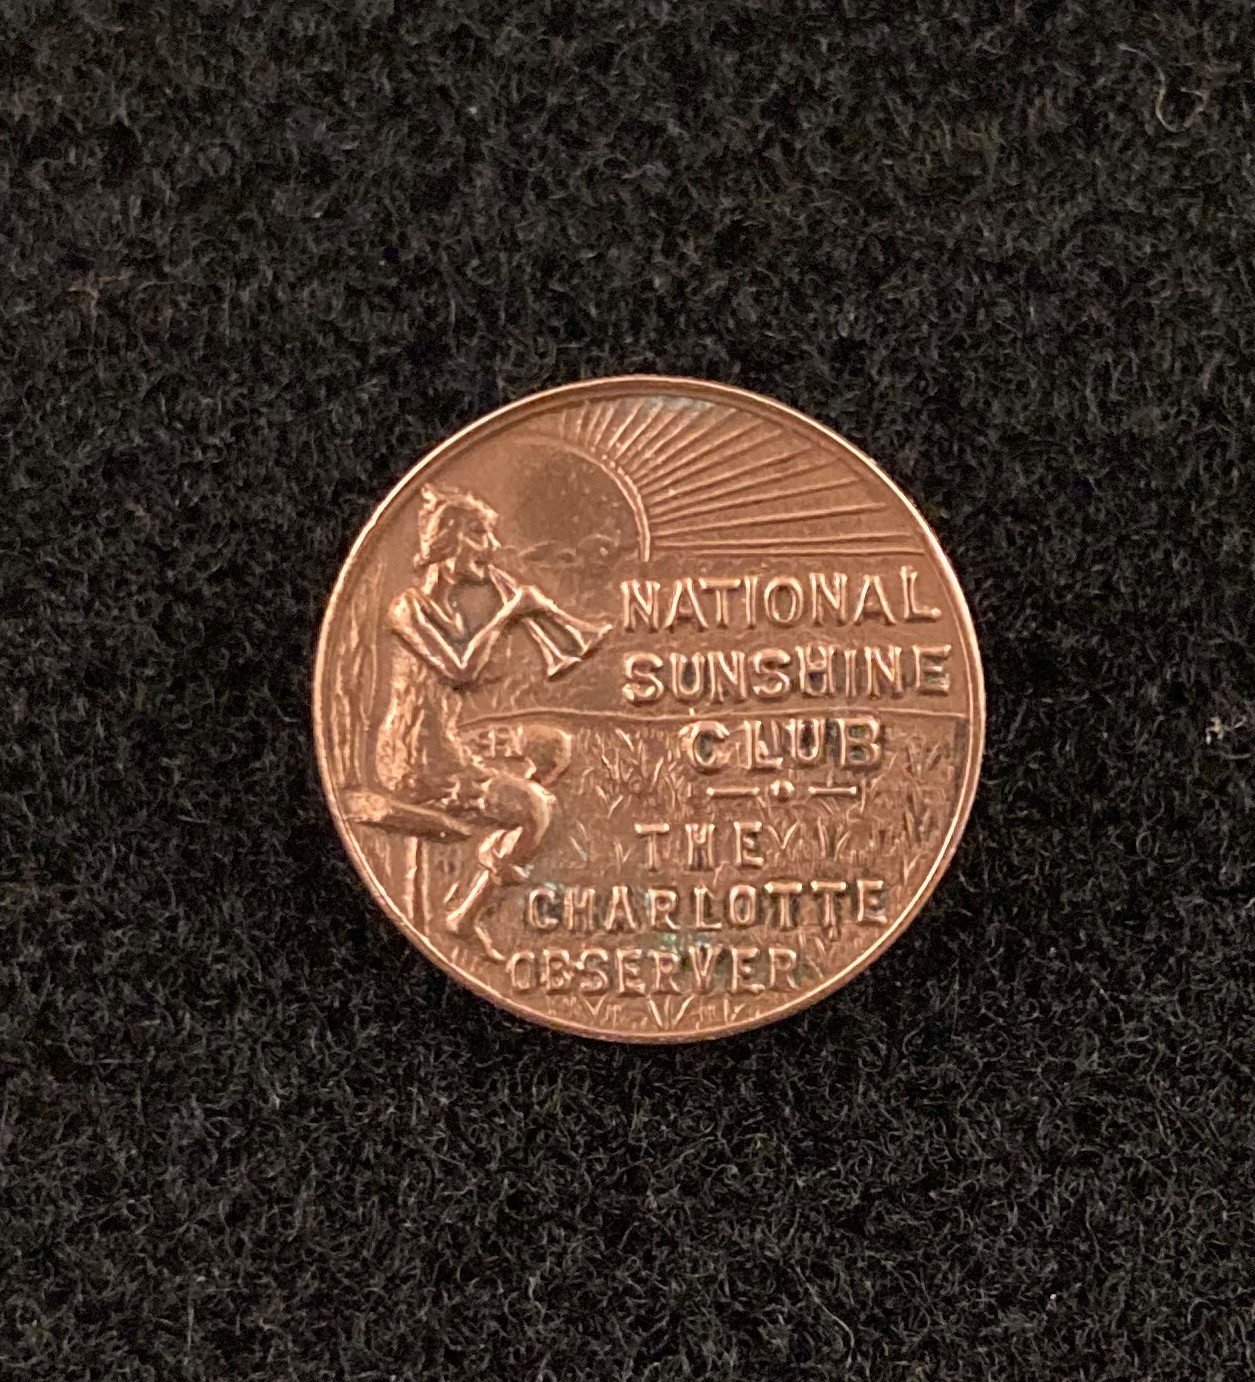 Pinback buton with image of person blowing on two horns and the words "National Sunshine Club, The Charlotte Observer."